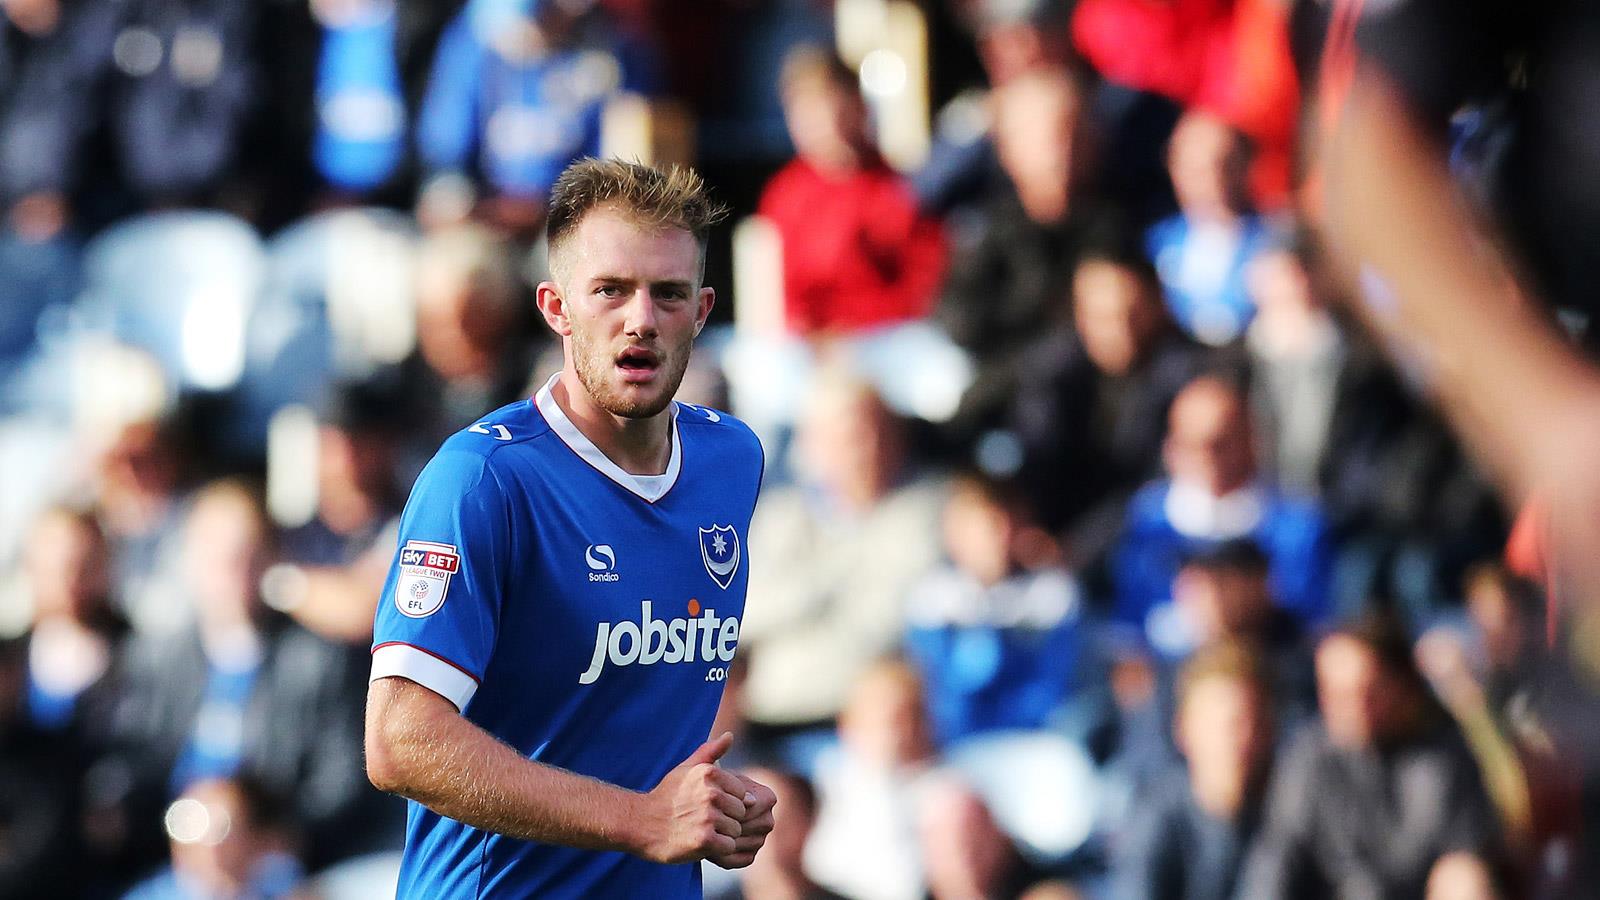 CLARKE HELPS LAY SOLID FOUNDATIONS - News - Portsmouth